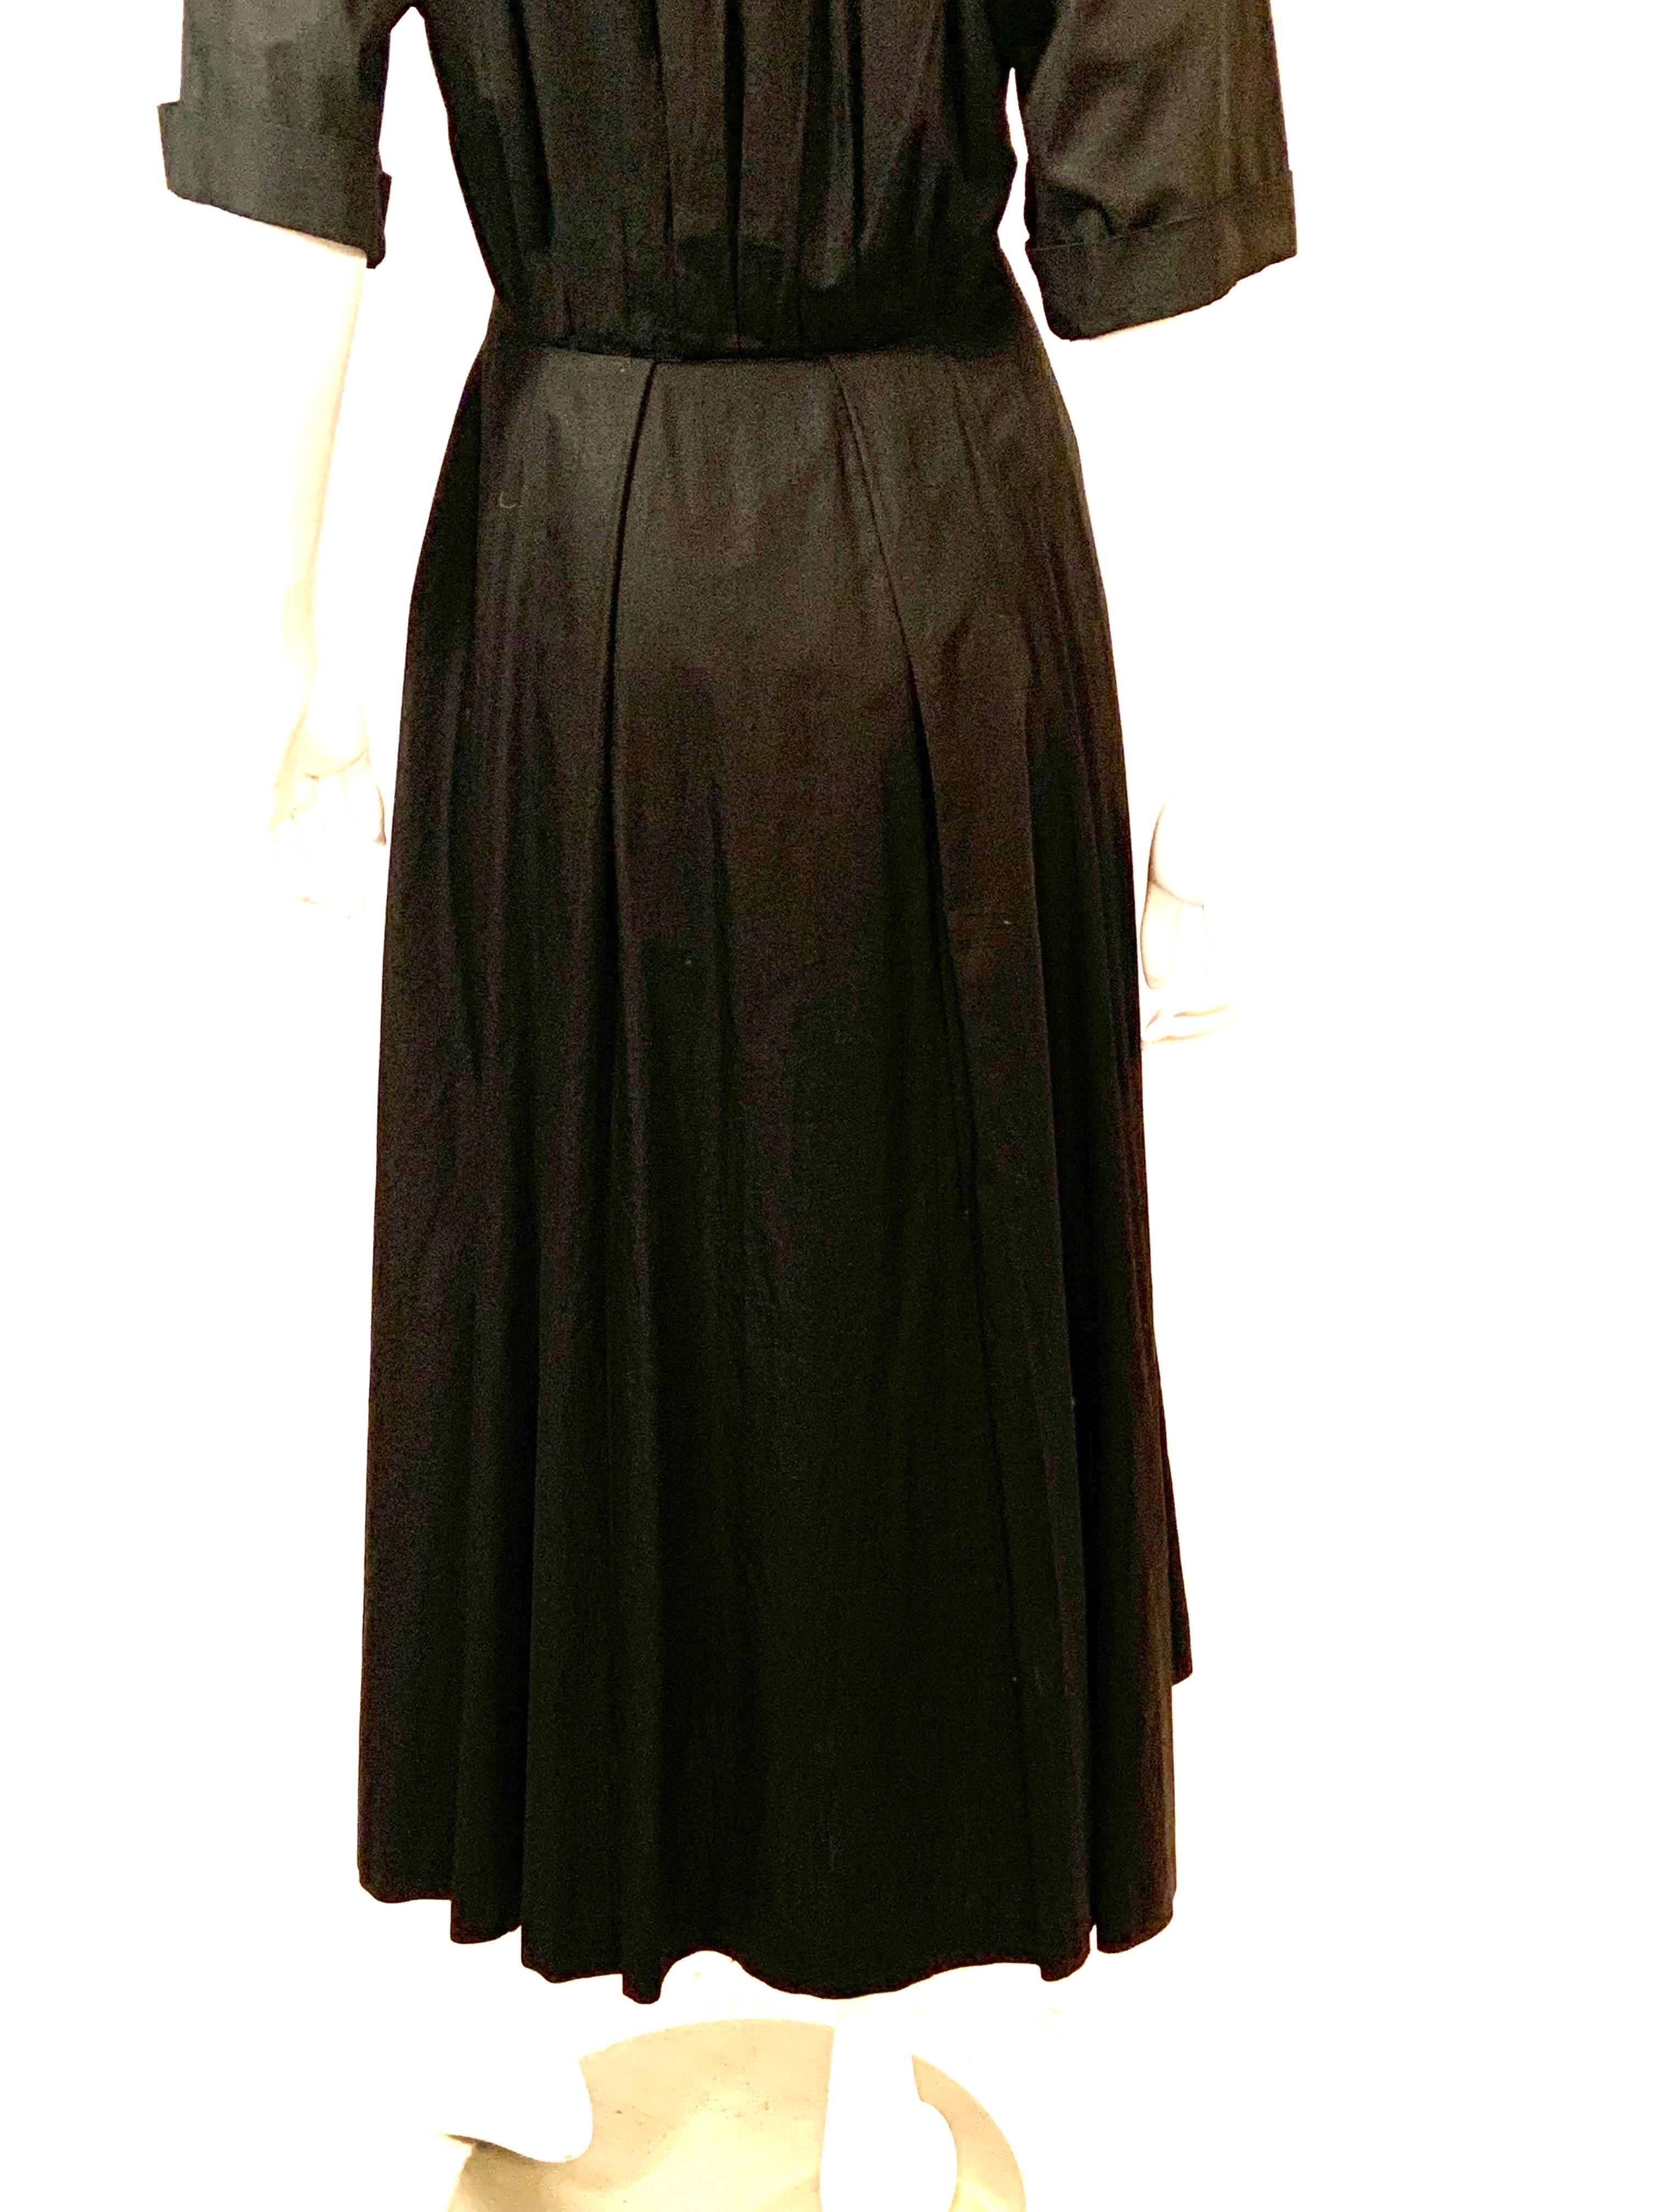 Ferragamo Black Cotton Dress with High Side Opening For Sale 6